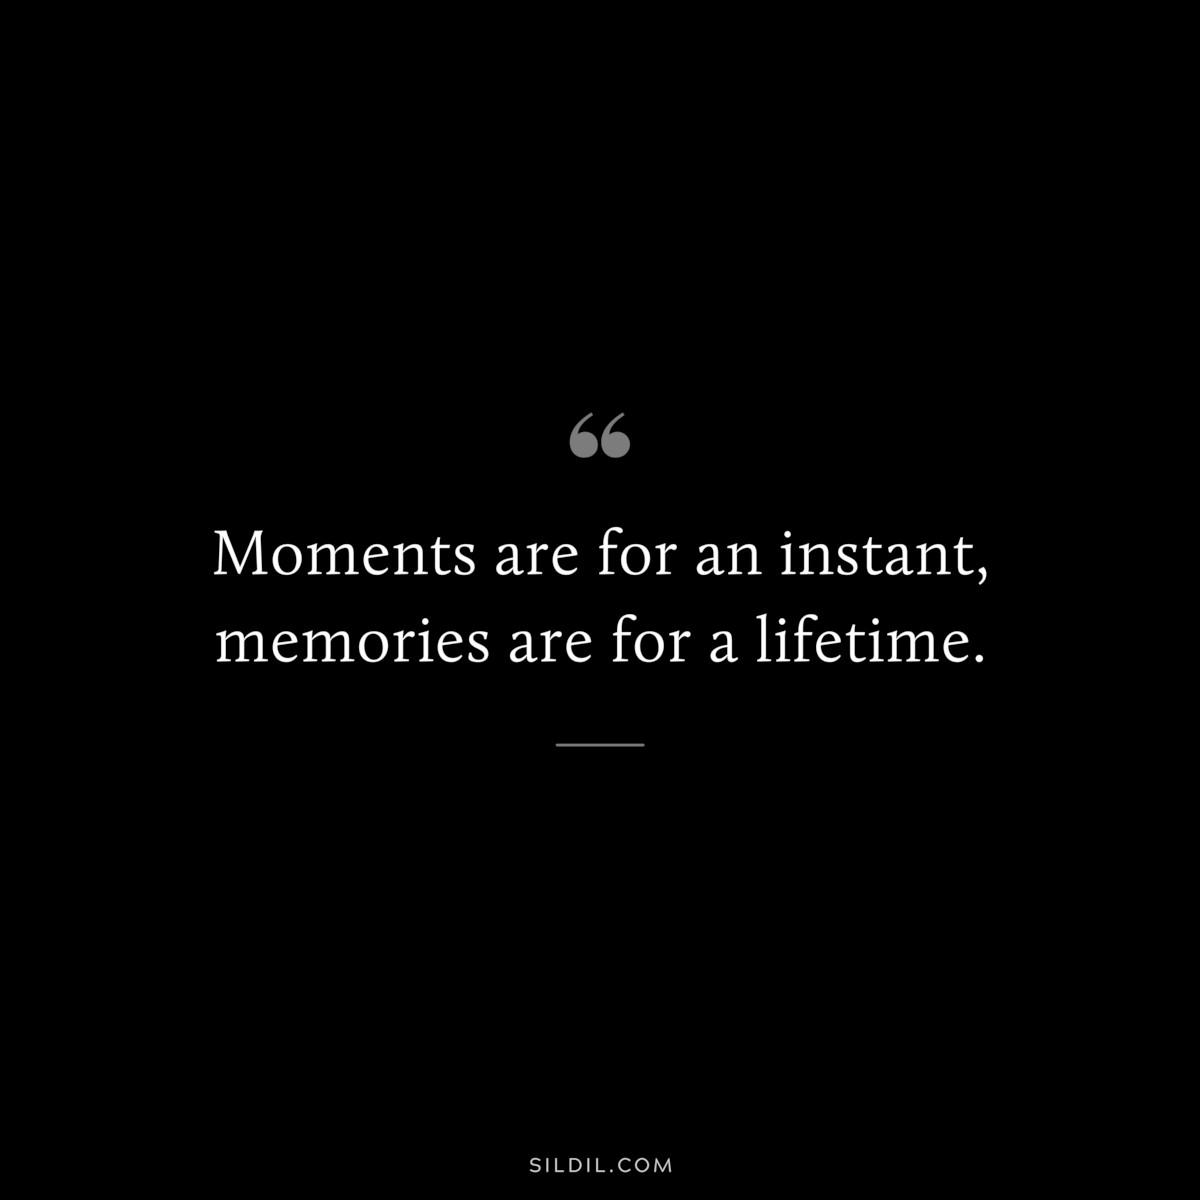 Moments are for an instant, memories are for a lifetime.